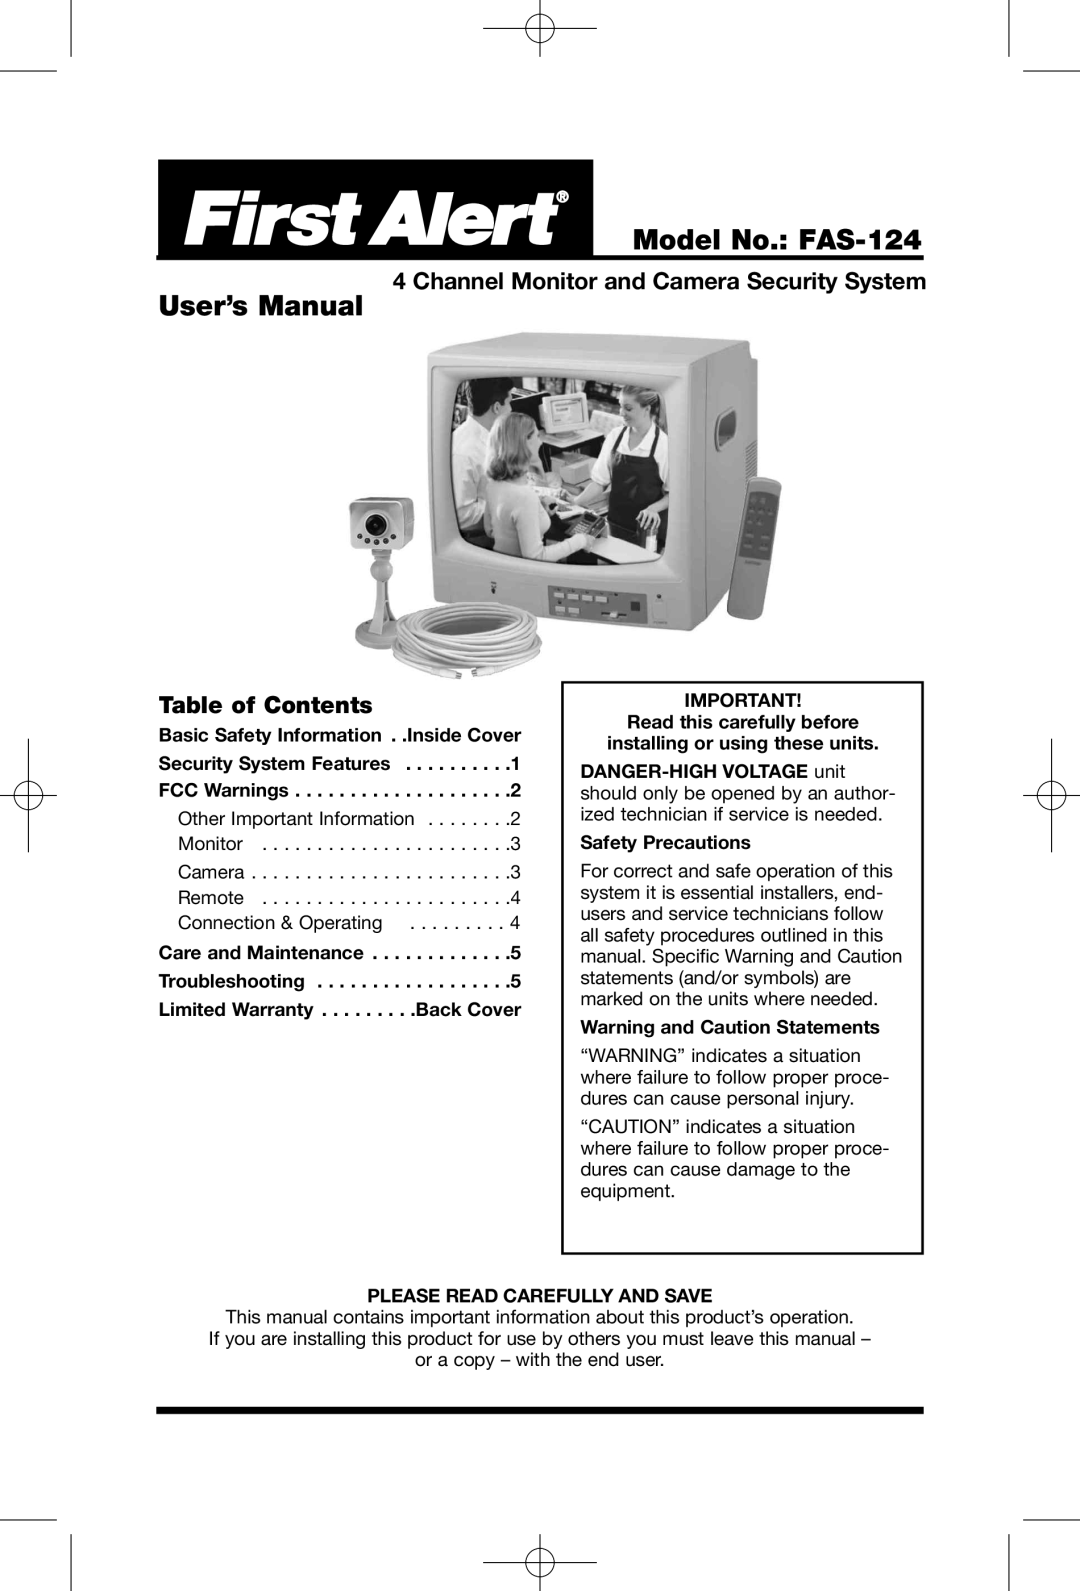 First Alert user manual Model No. FAS-124, Channel Monitor and Camera Security System, Table of Contents 